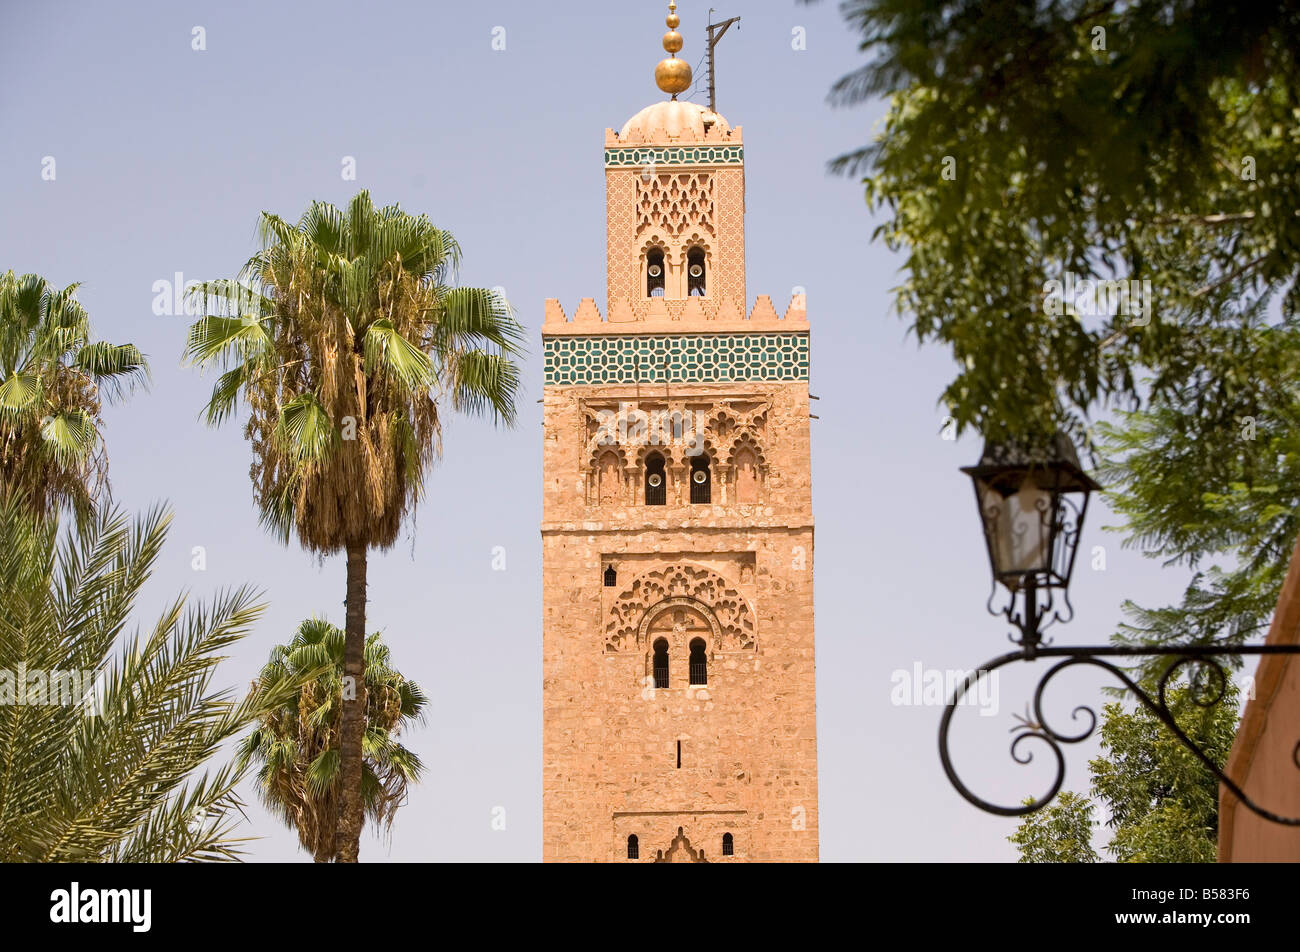 Koutoubia tower (minaret), Marrakech, Morocco, North Africa, Africa Stock Photo